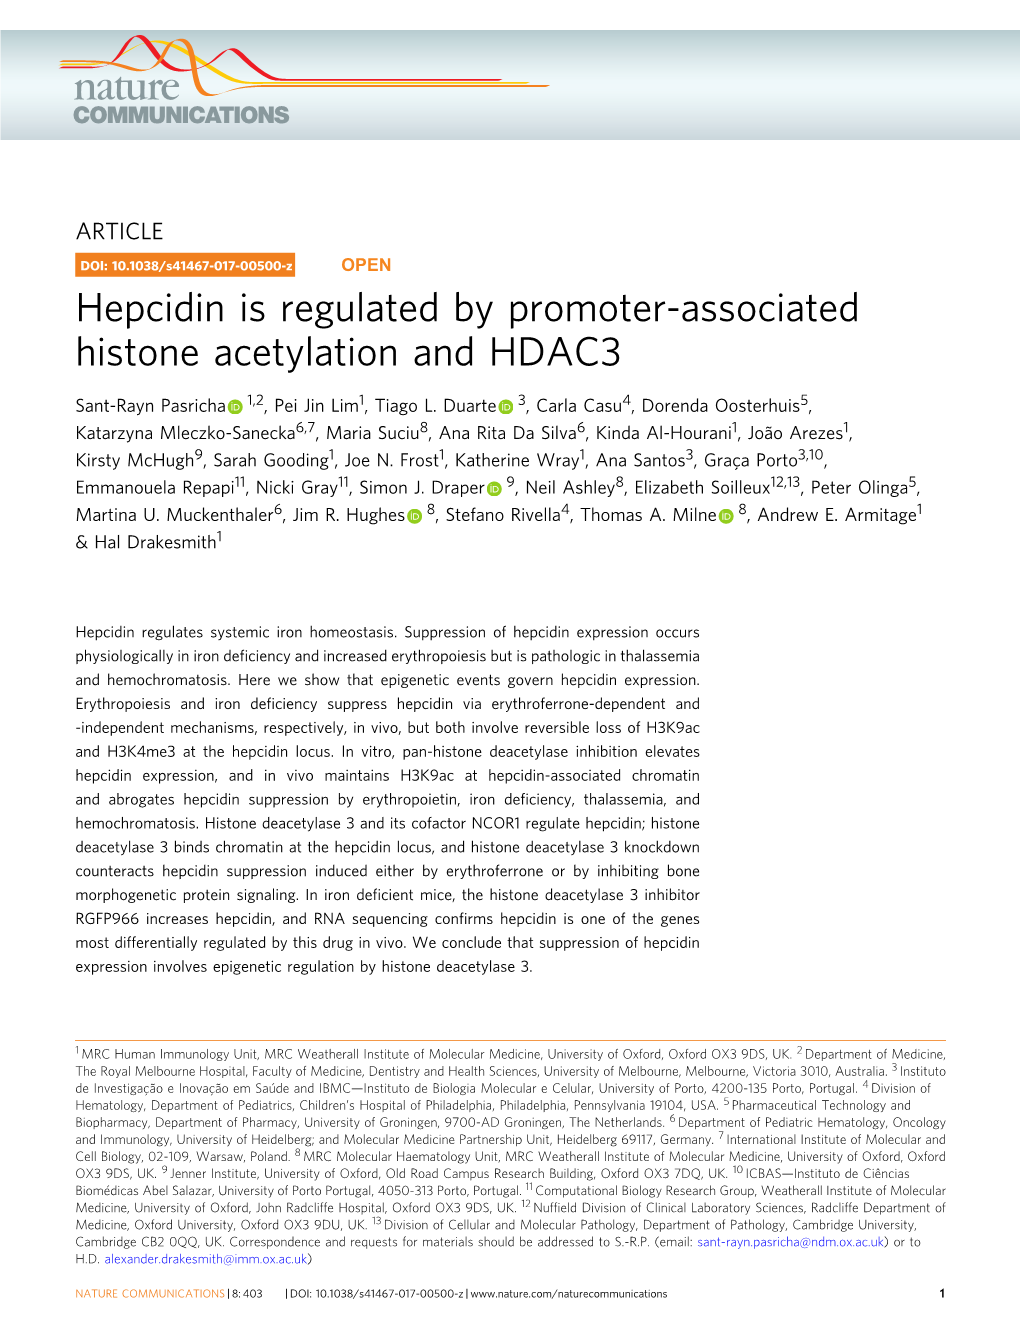 Hepcidin Is Regulated by Promoter-Associated Histone Acetylation and HDAC3